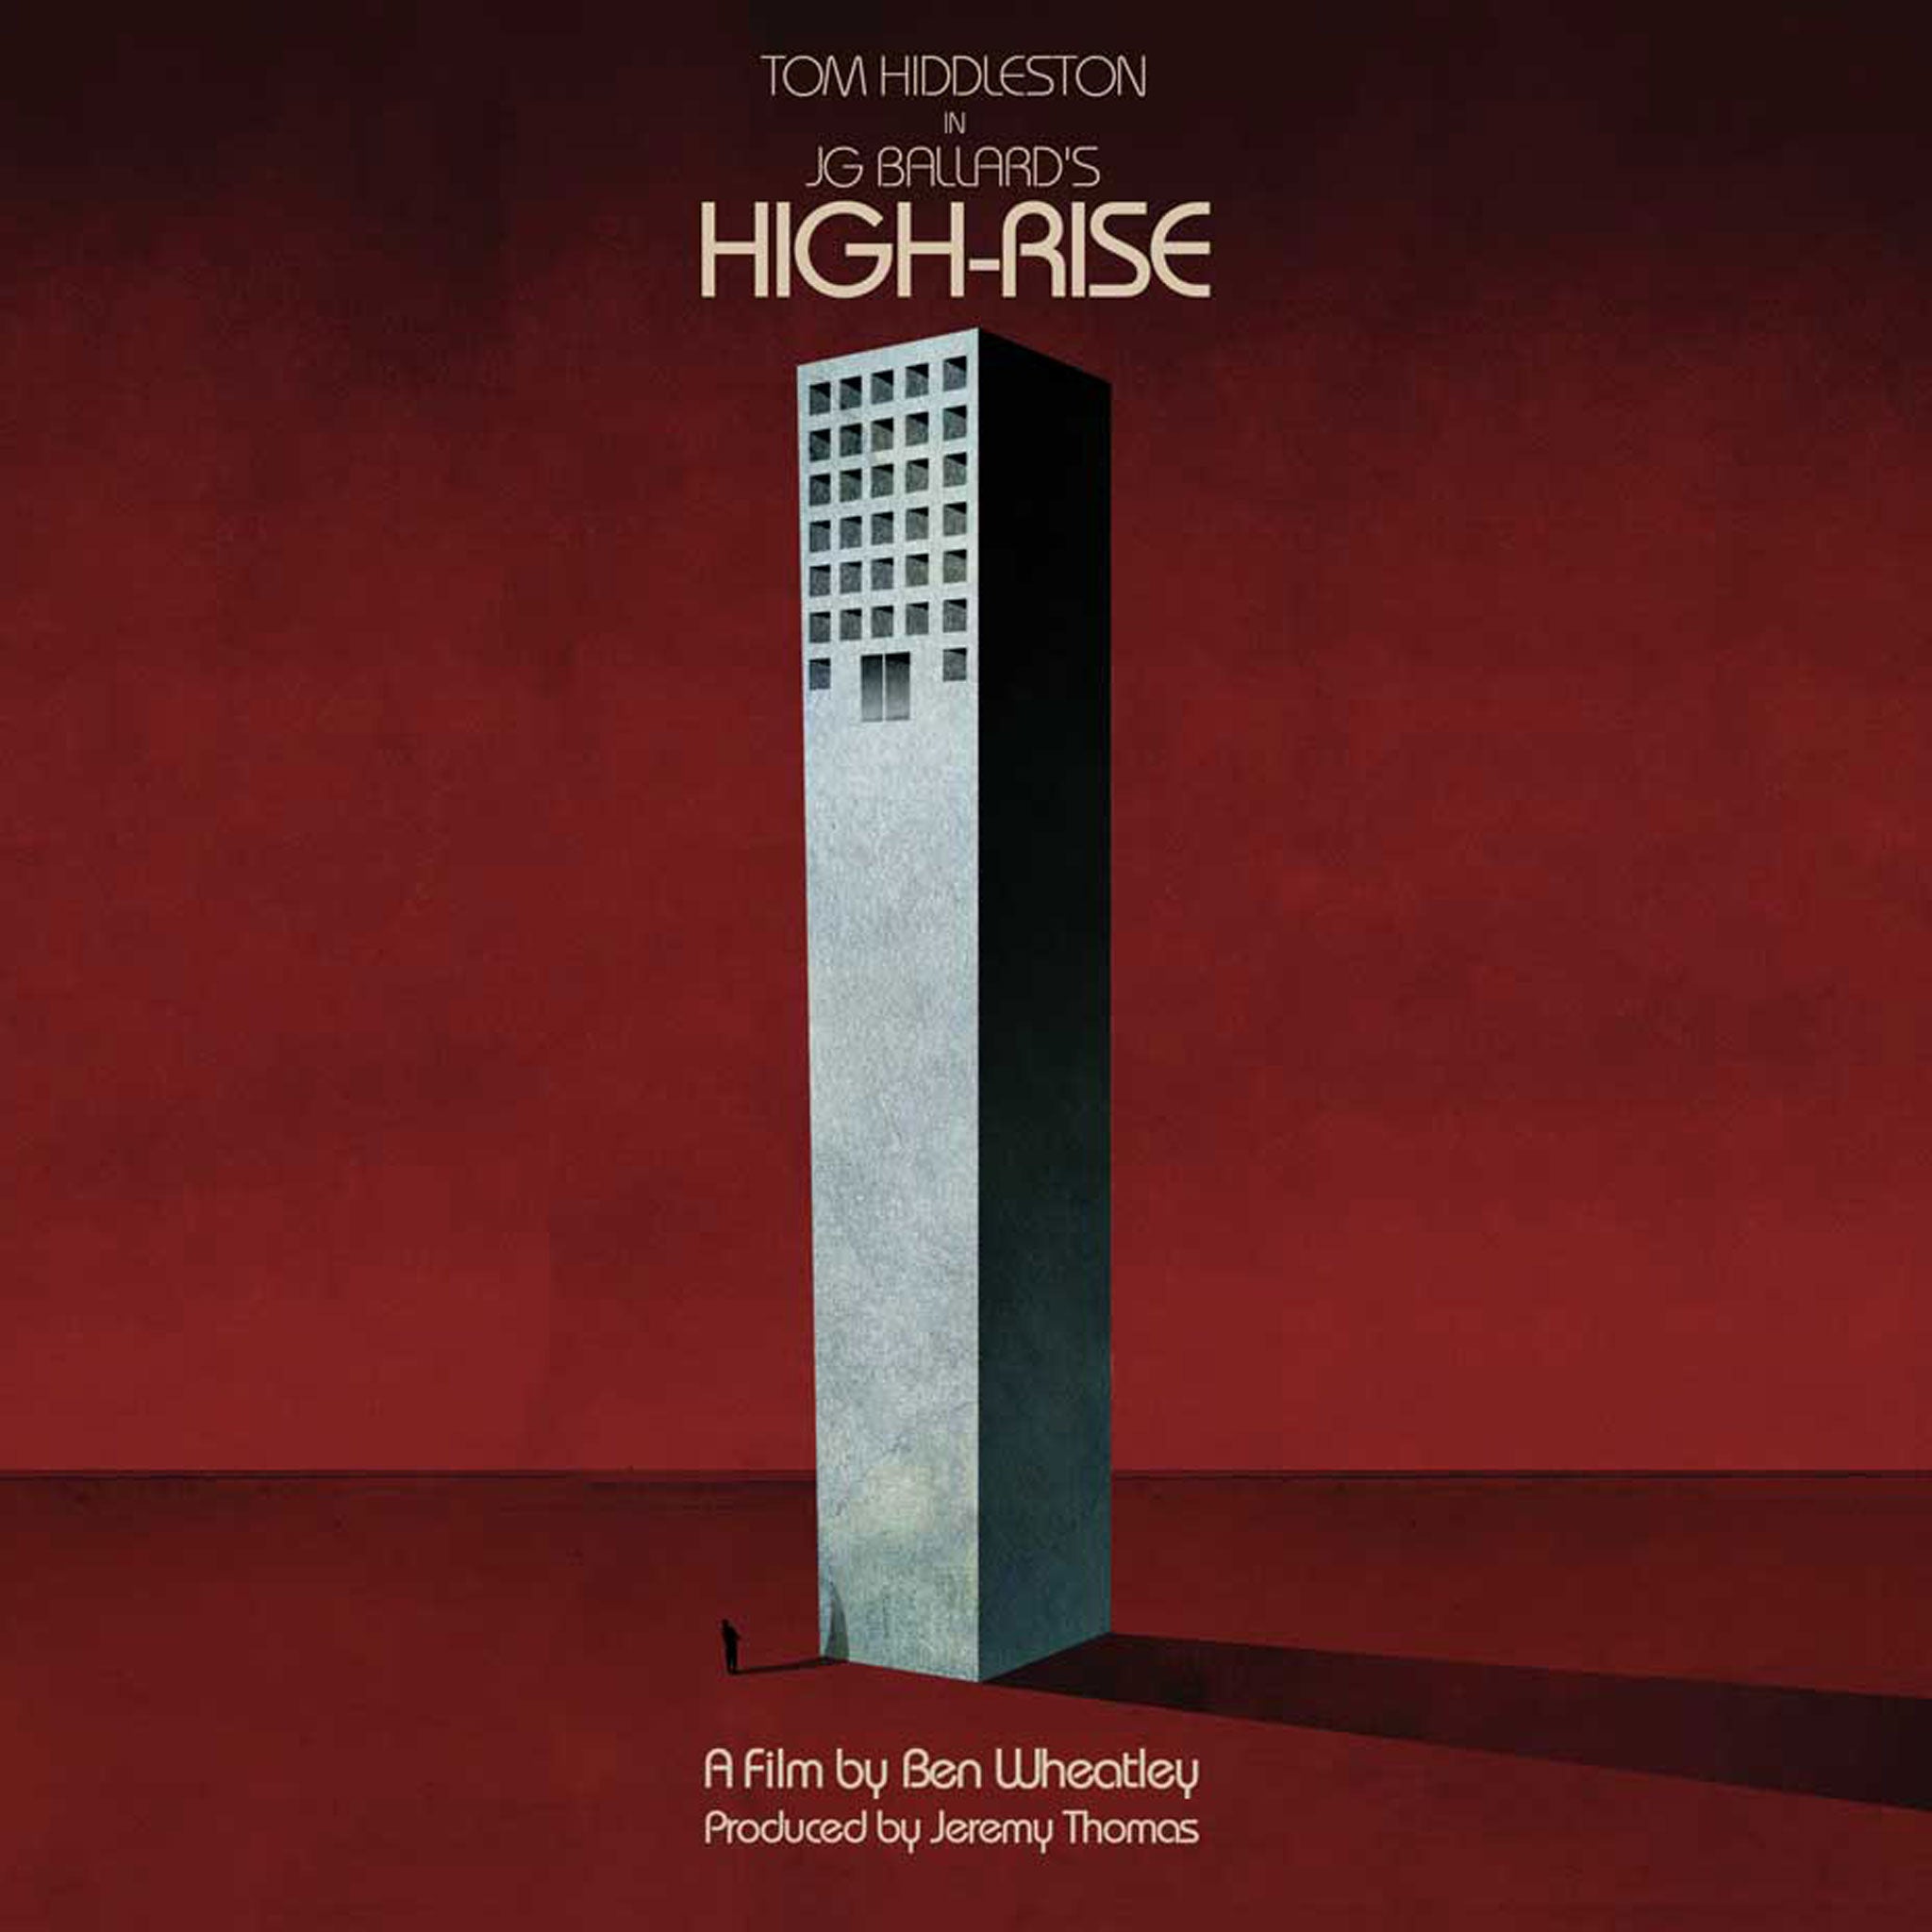 The poster for High-Rise starring Tom Hiddleston